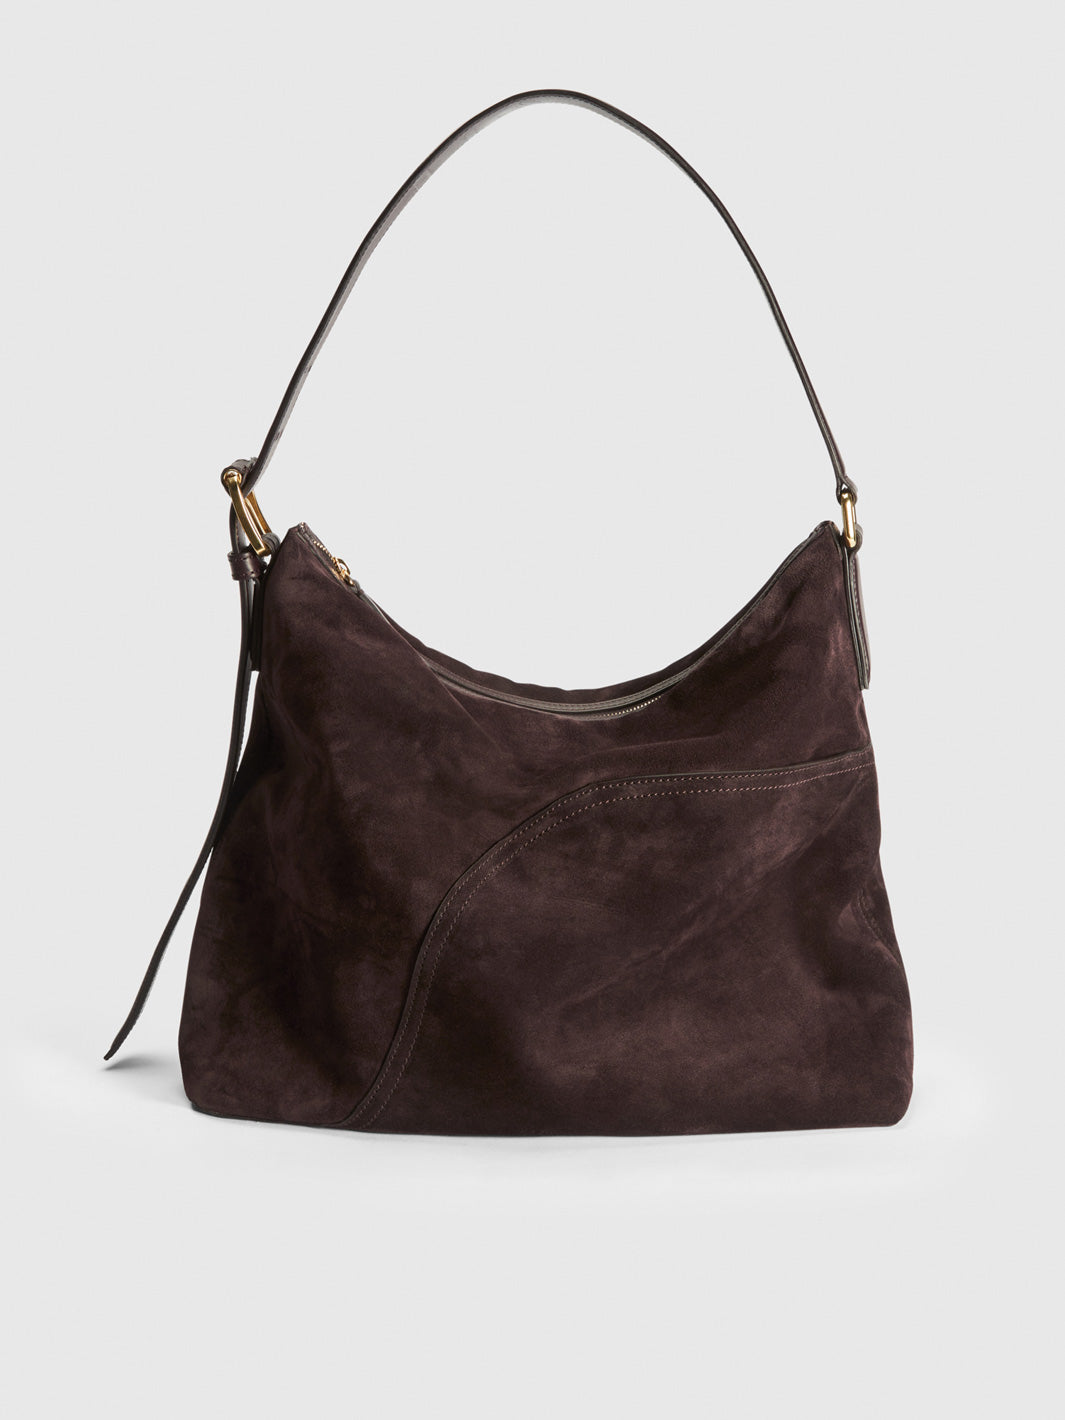 Bassano Walnut Suede/Leather Tote bag